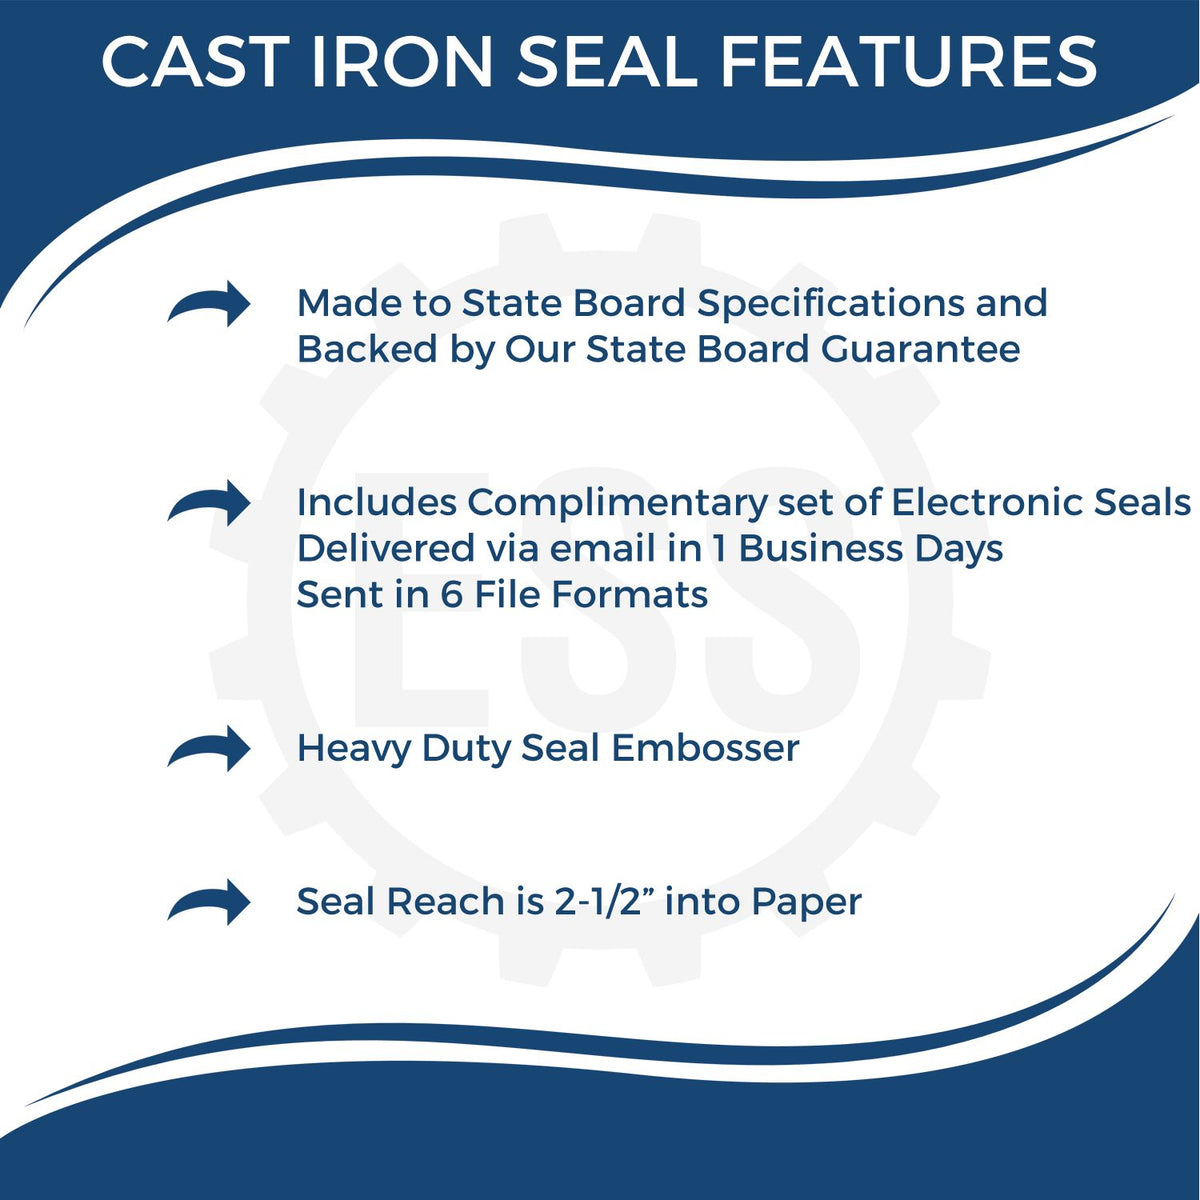 A picture of an infographic highlighting the selling points for the Heavy Duty Cast Iron Alaska Land Surveyor Seal Embosser